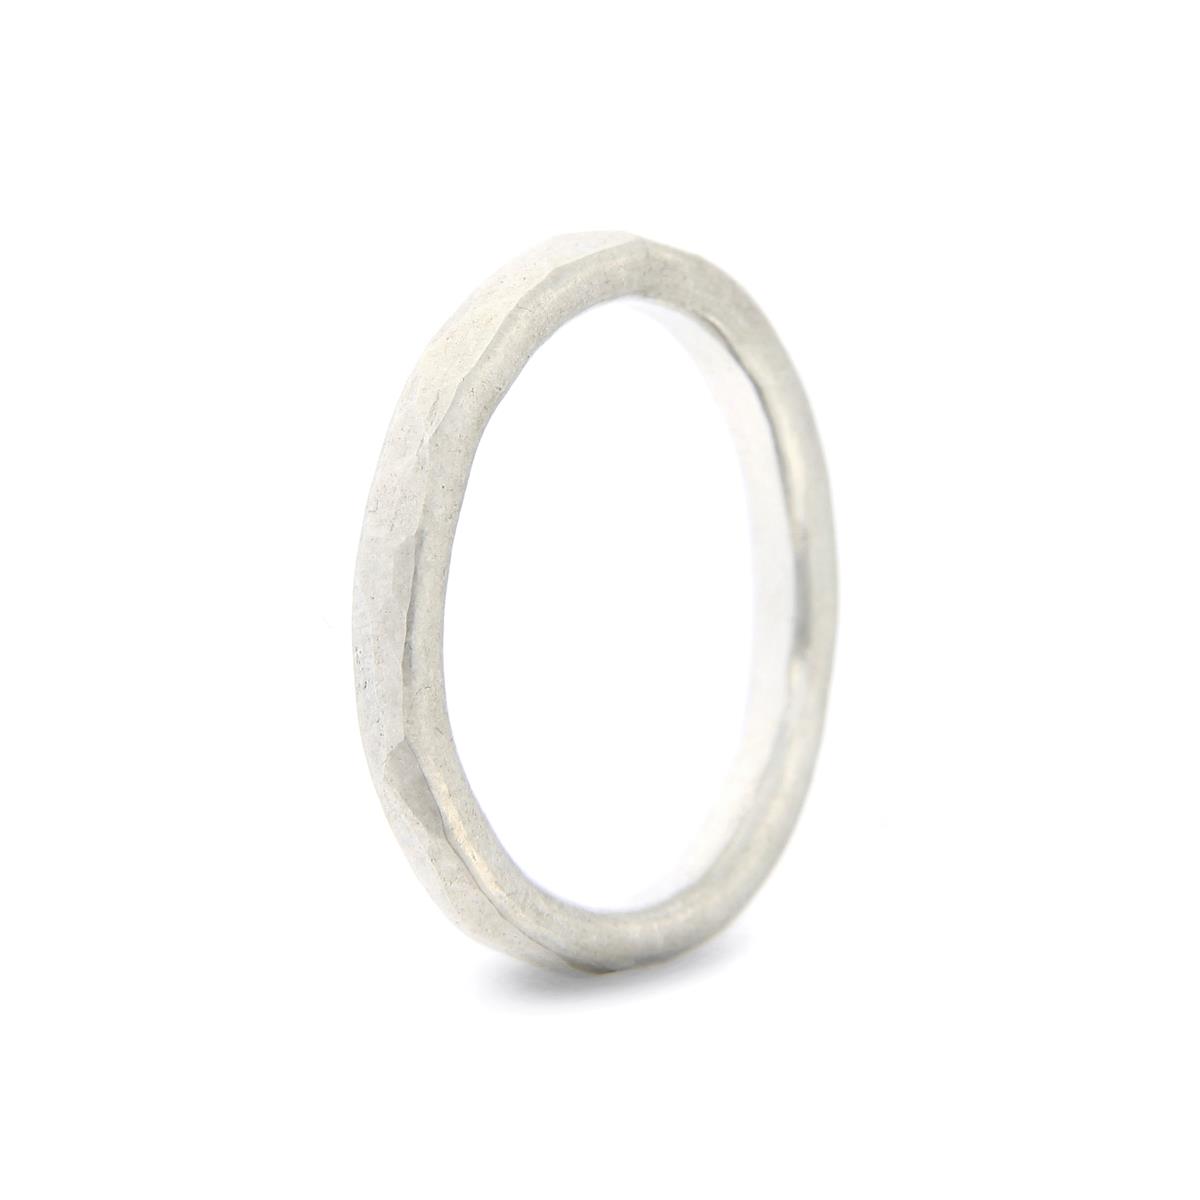 Katie g. Jewellery - Hammered Ring 2,5mm - Silver